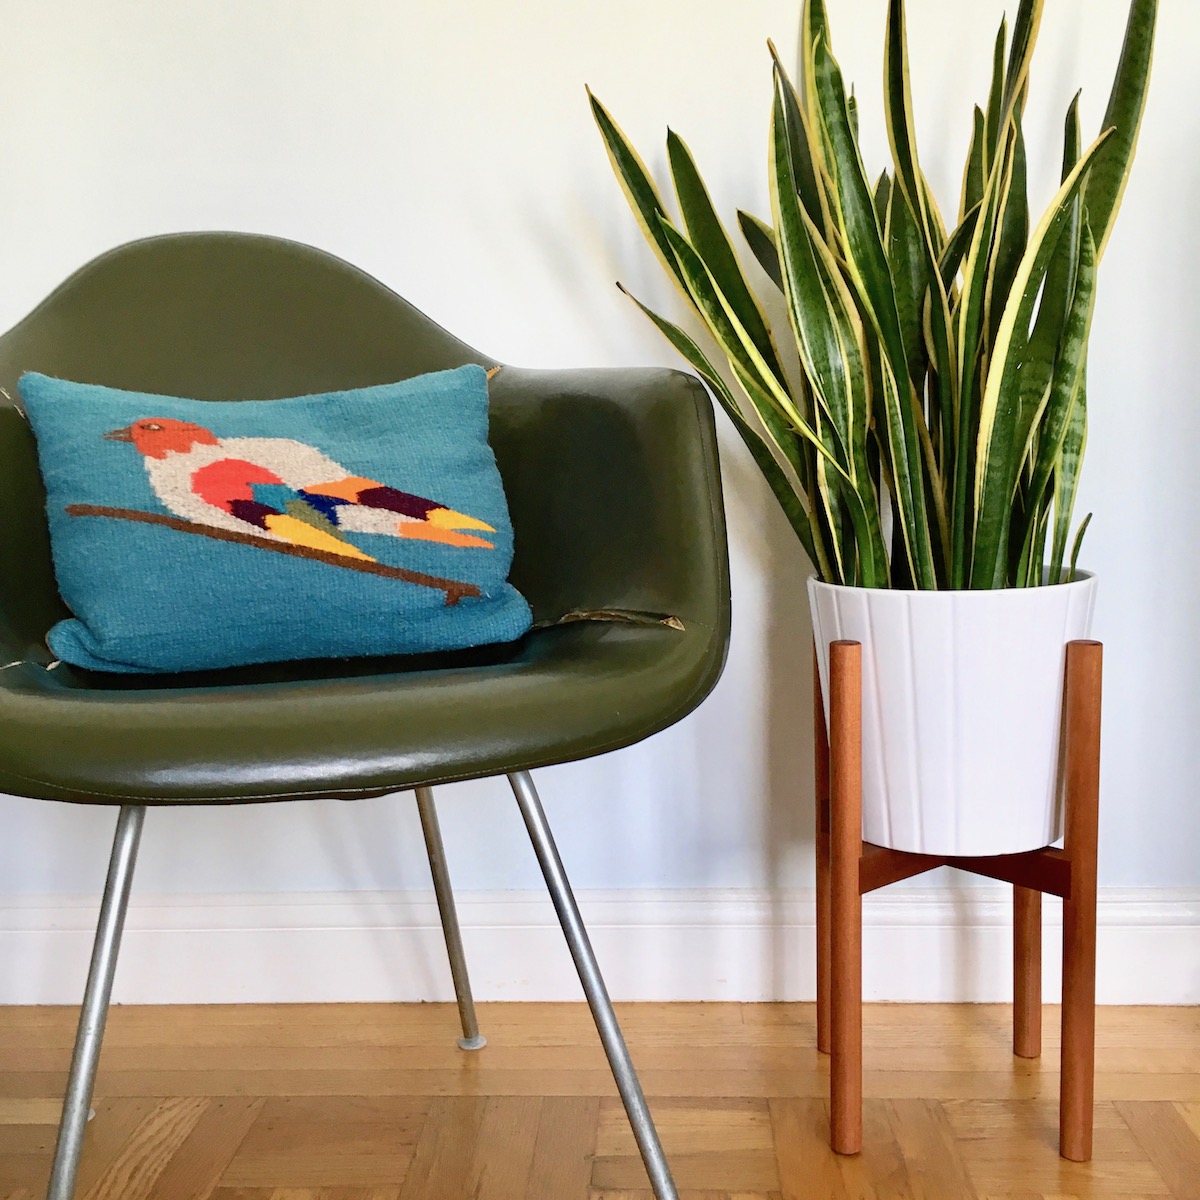 An Eames shellchair with a colorful pillow next to a white plant pot with a snake plant on a wooden midcentury style stand with 4 legs.